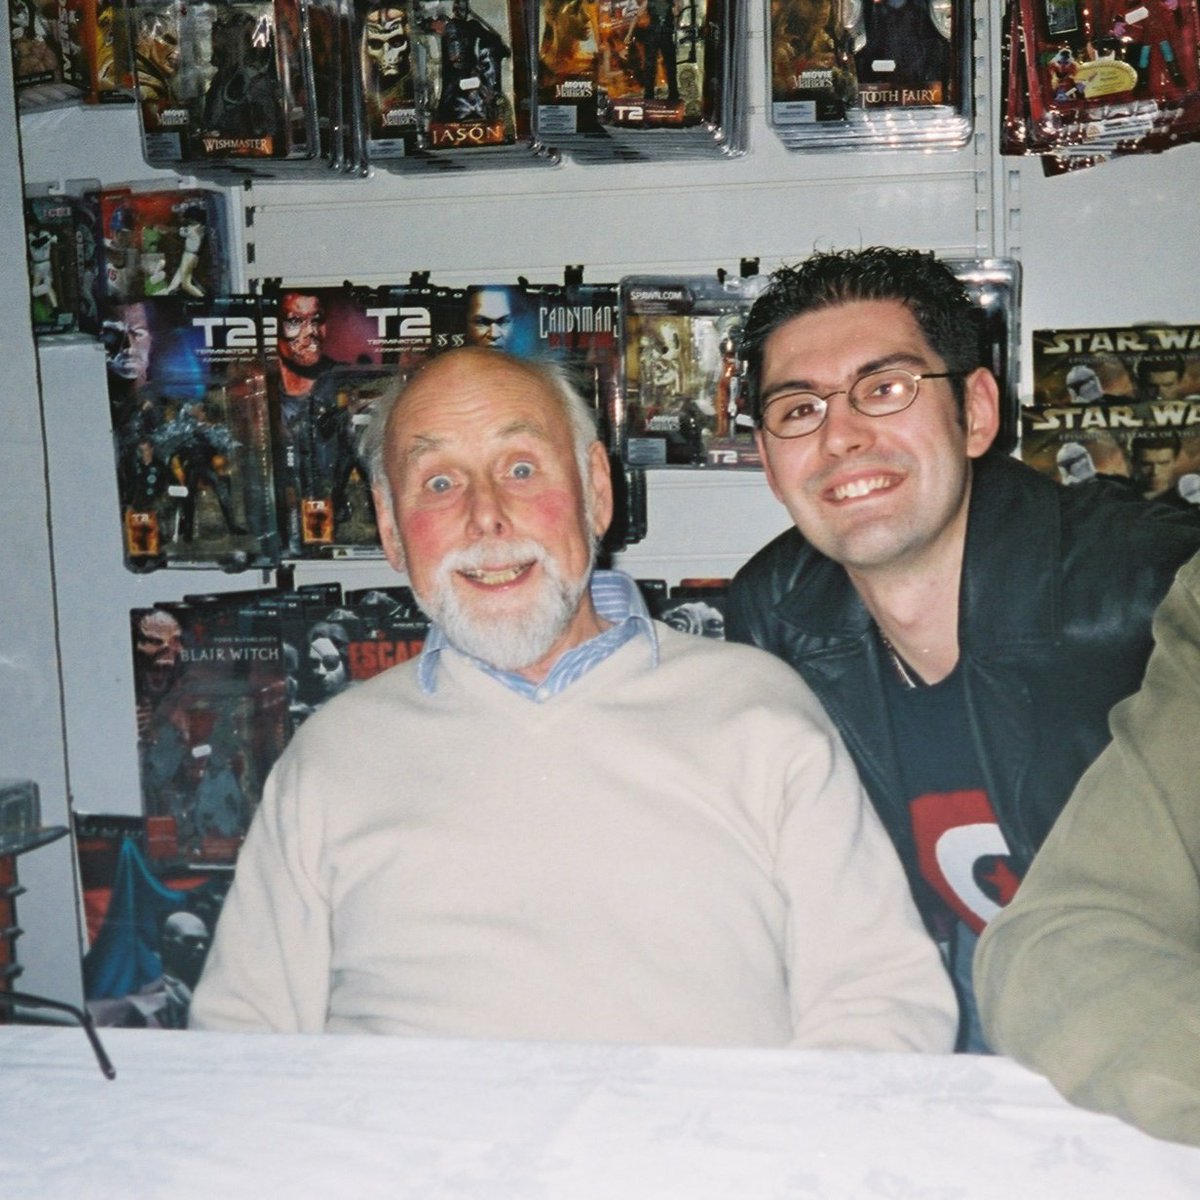 Today's Camping It Up star was one of Doctor Who's most prolific directors, Christopher Barry. Here's a man who is giving it his all and obviously delighted to be photographed with me! I'm quite restrained in comparison. This is autumn 2002. I bunked off work for this signing!